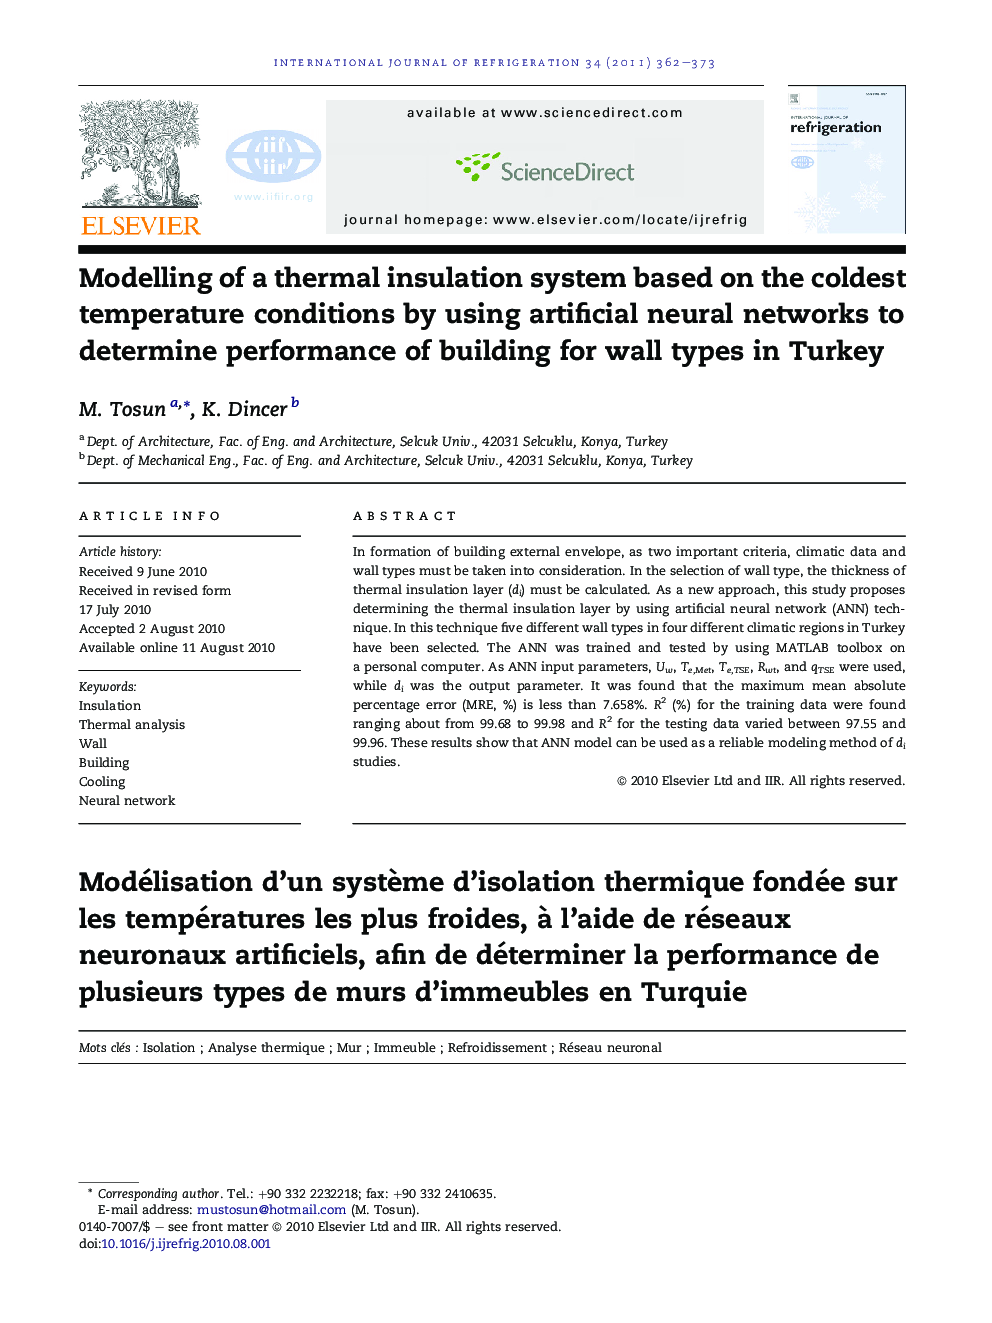 Modelling of a thermal insulation system based on the coldest temperature conditions by using artificial neural networks to determine performance of building for wall types in Turkey